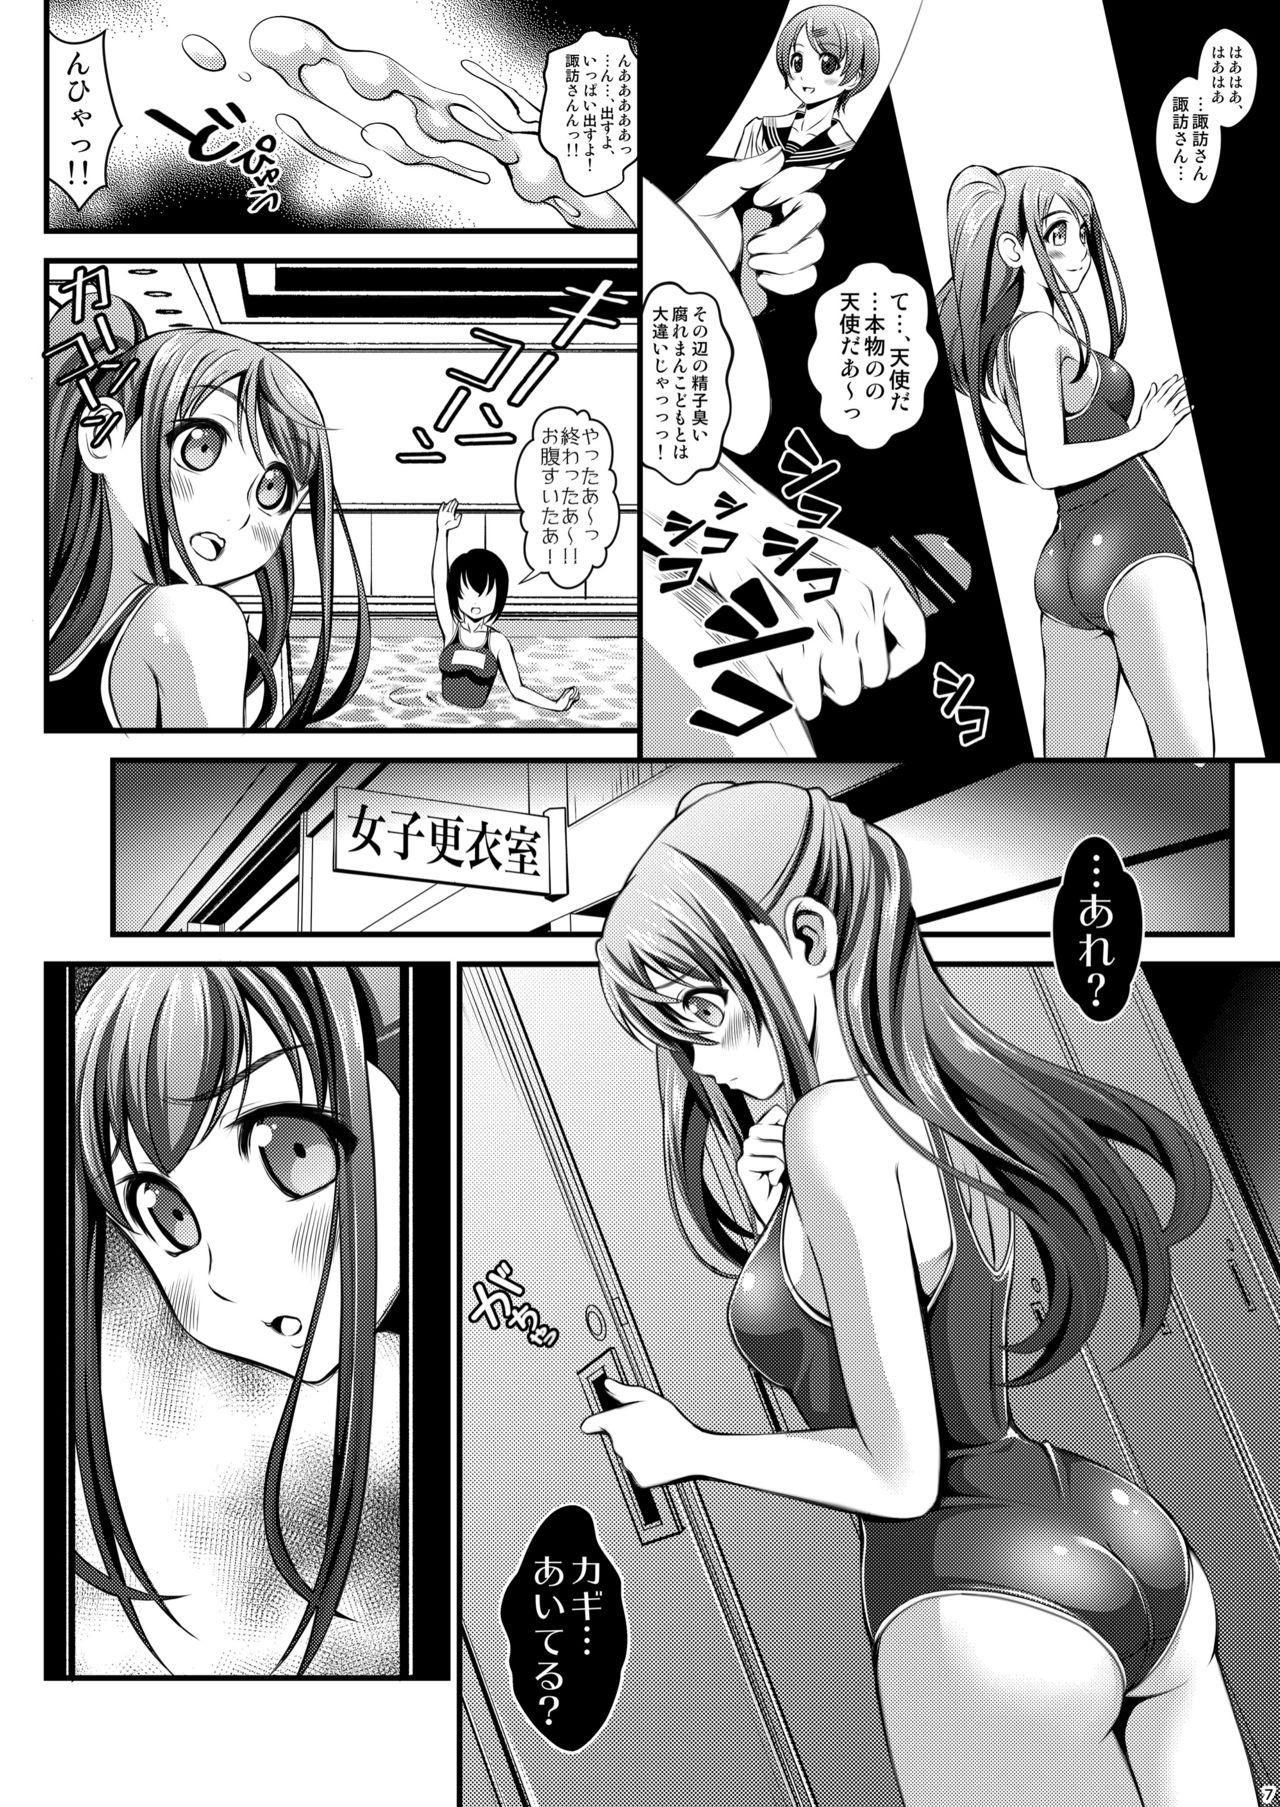 Mistress Youmuin no Ossan - Original Breasts - Page 7